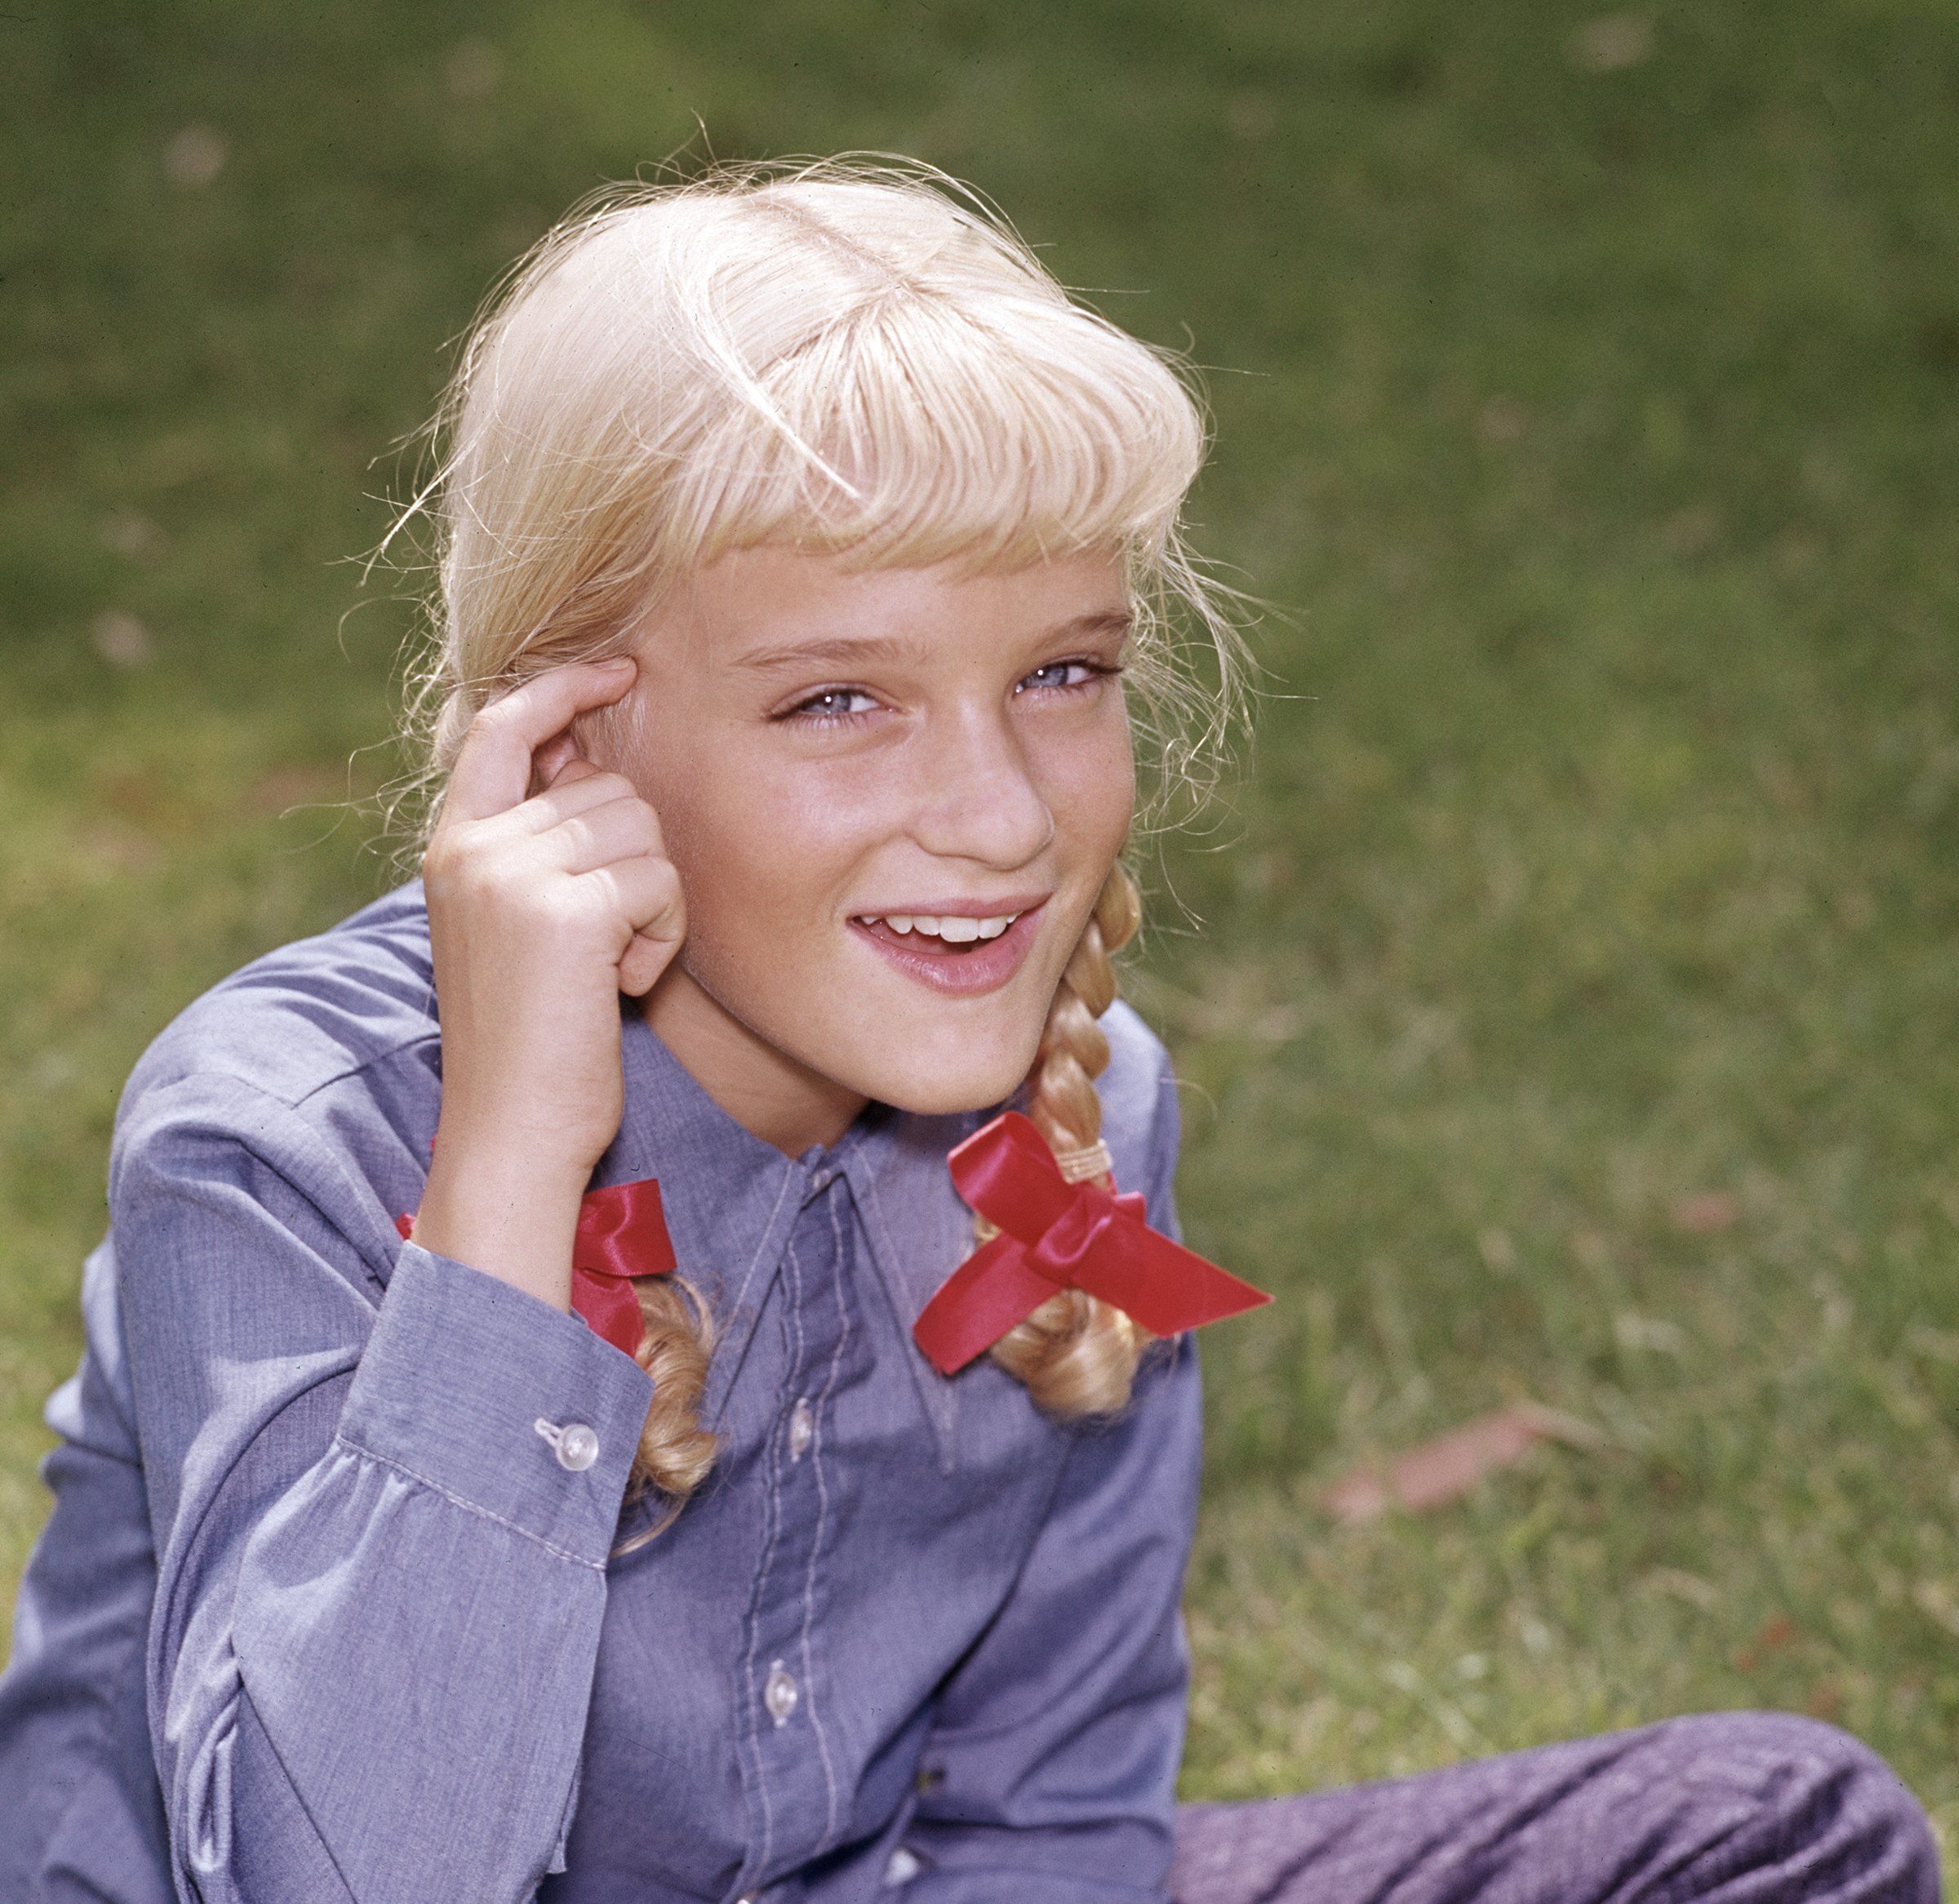 What Does Cindy From Brady Bunch Look Like Now?